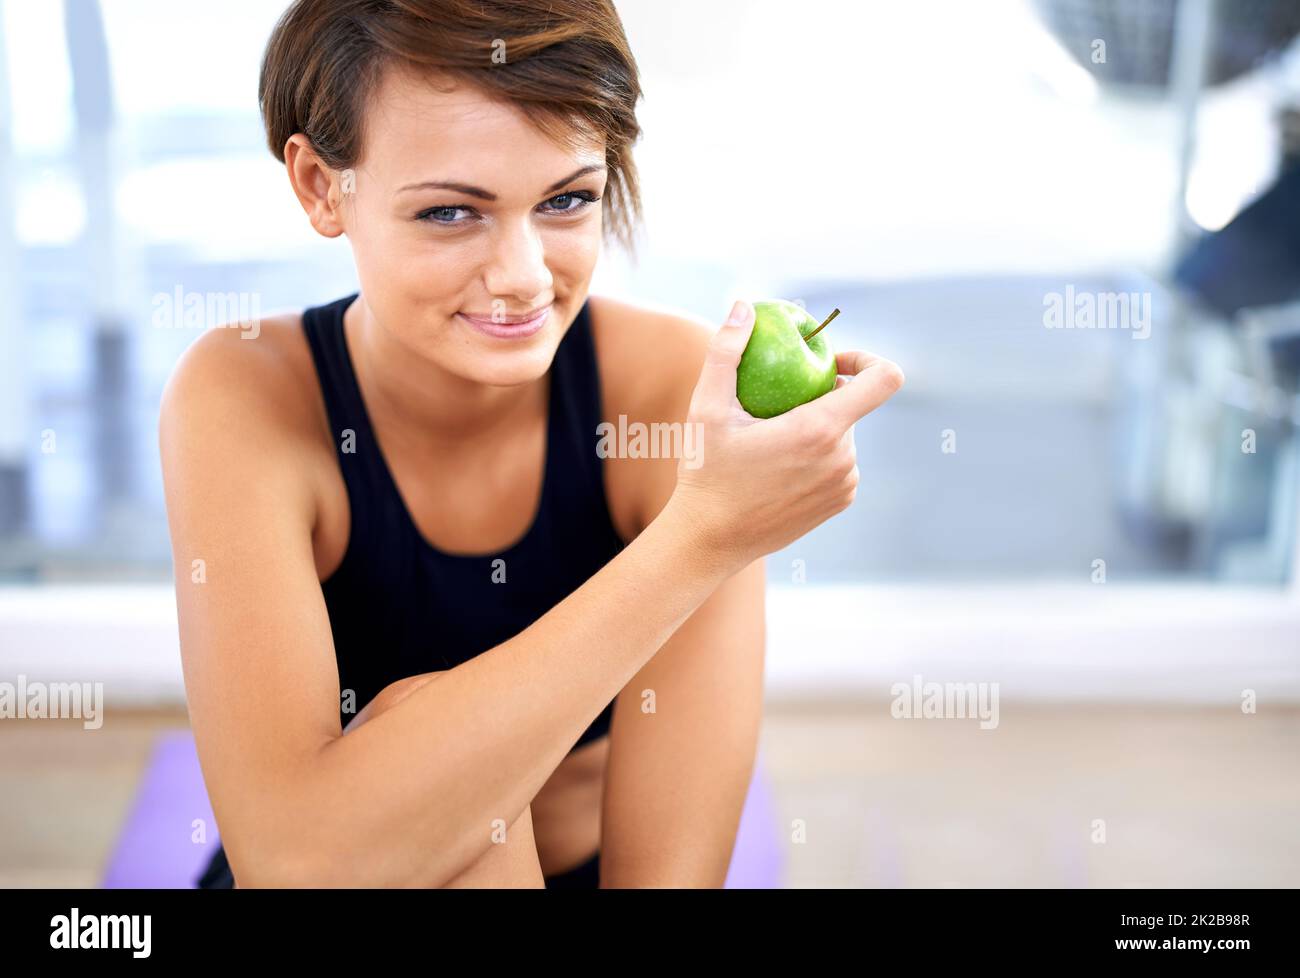 All part of the healthy lifestyle. Shot of a sporty young woman sitting on a gym floor eating an apple. Stock Photo